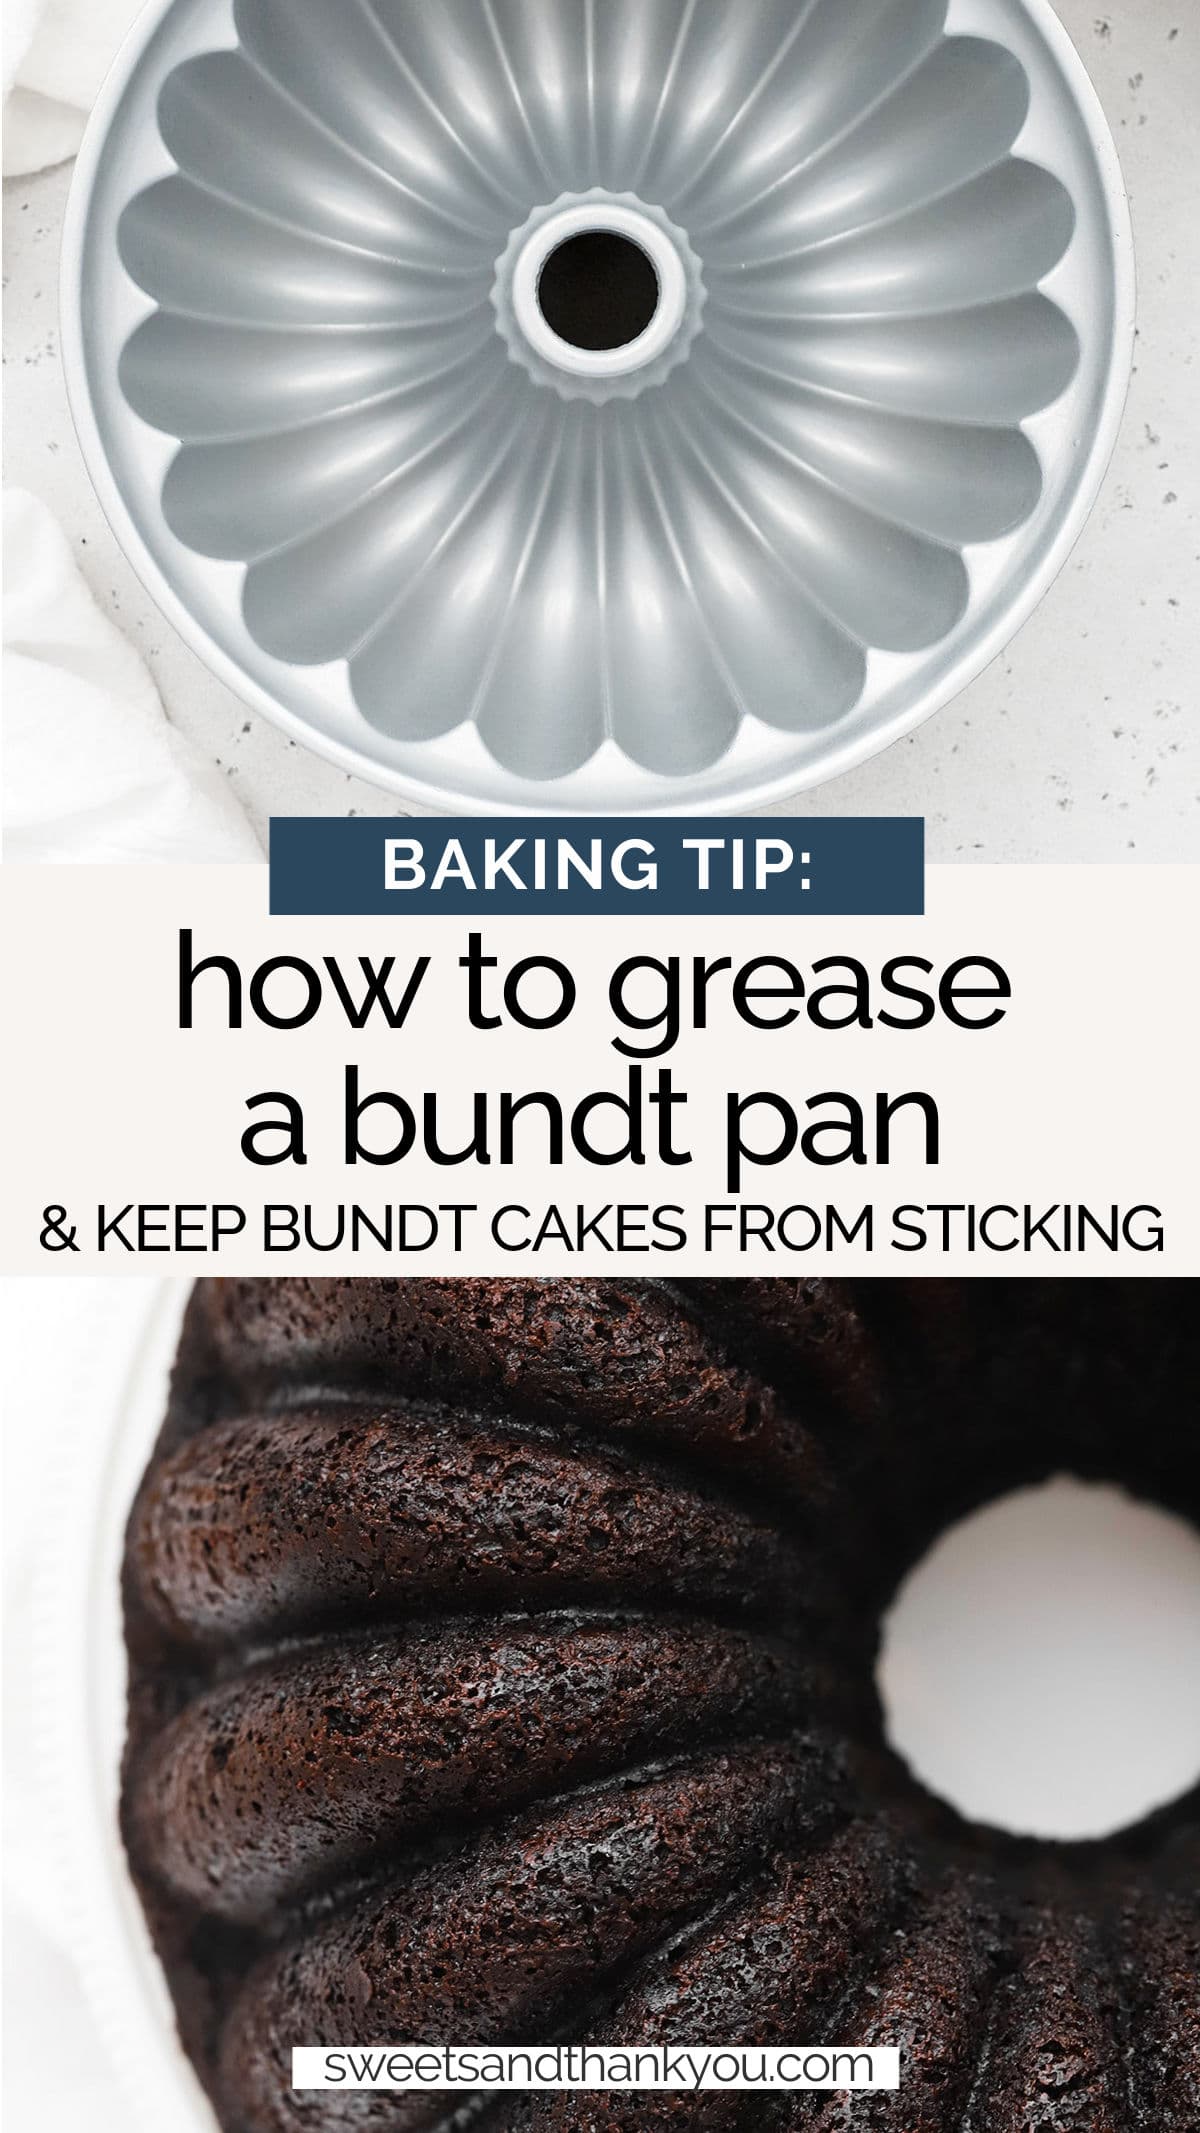 How To Grease A Bundt Pan - Learn the best way to grease your bundt pan and how to keep bundt cakes from sticking! // How to Grease Bundt Pans // How to prevent bundt cakes from sticking // how to prep bundt pans // baking tip // how to grease a cake pan // cake pan tips // gluten free baking // gluten free cake